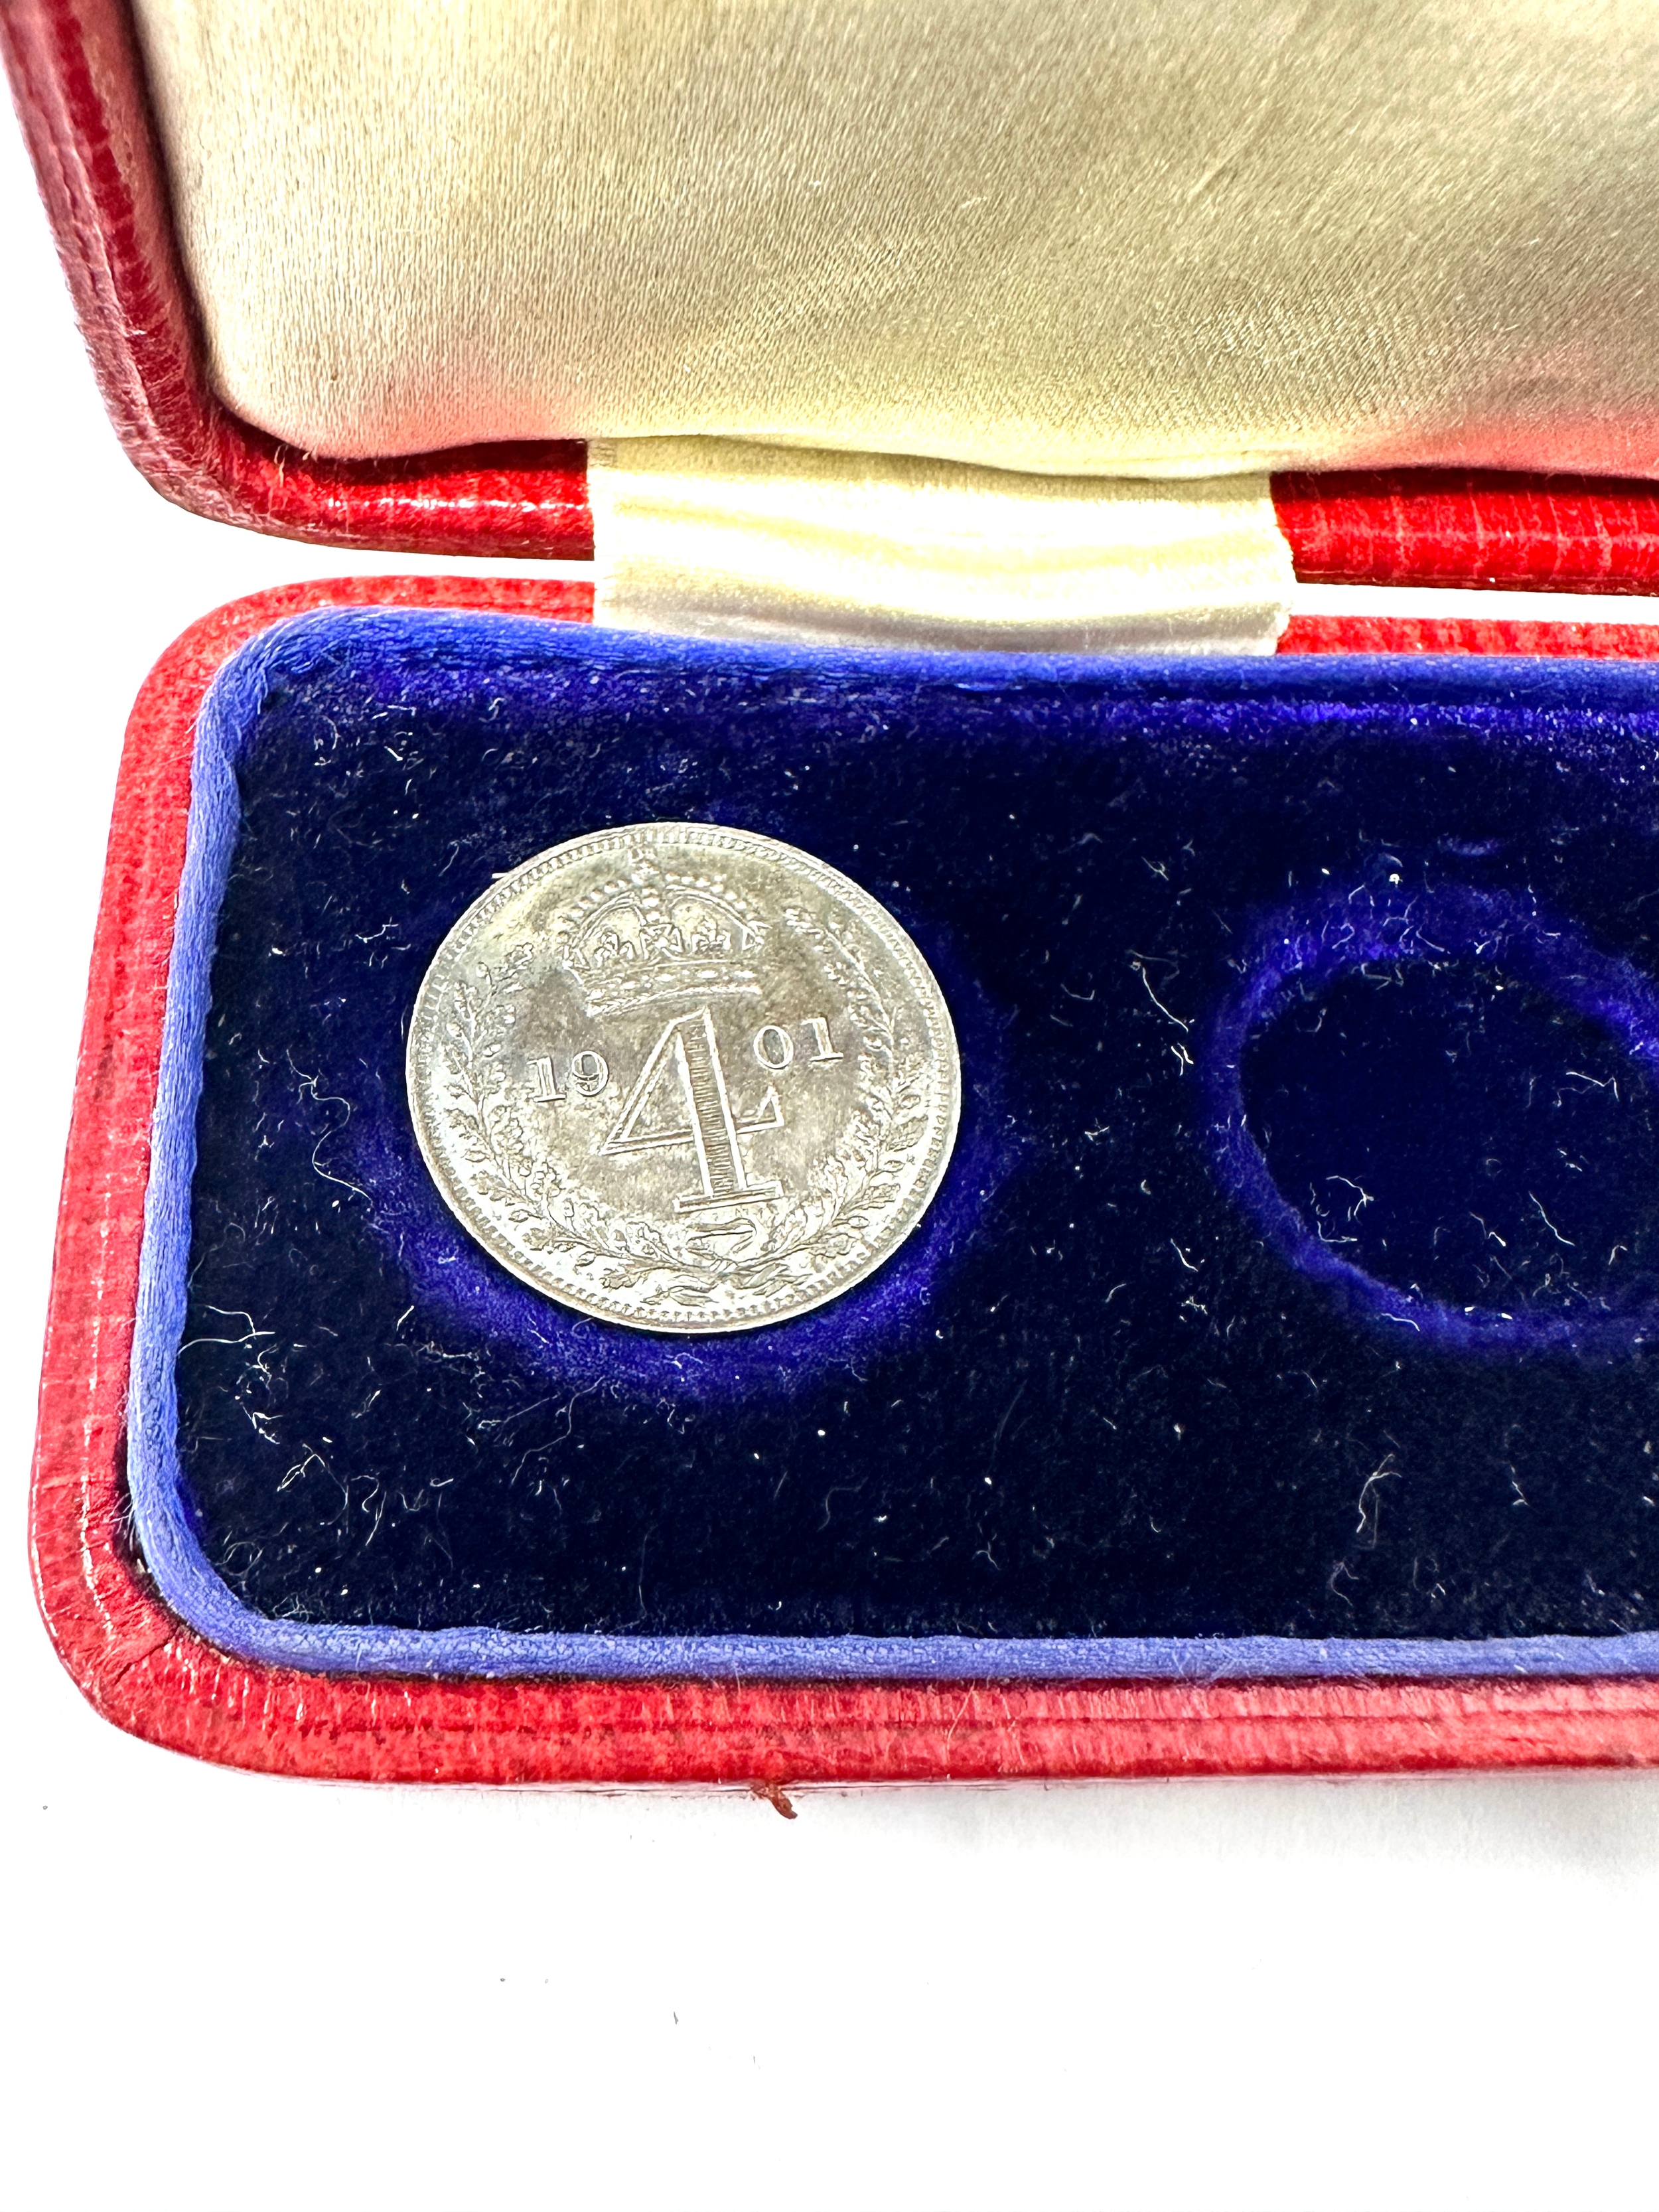 Part Queen Victoria Maundy Coin Set In Original Display Box 1901 UNC Condition missing 3 pence coin - Bild 2 aus 5